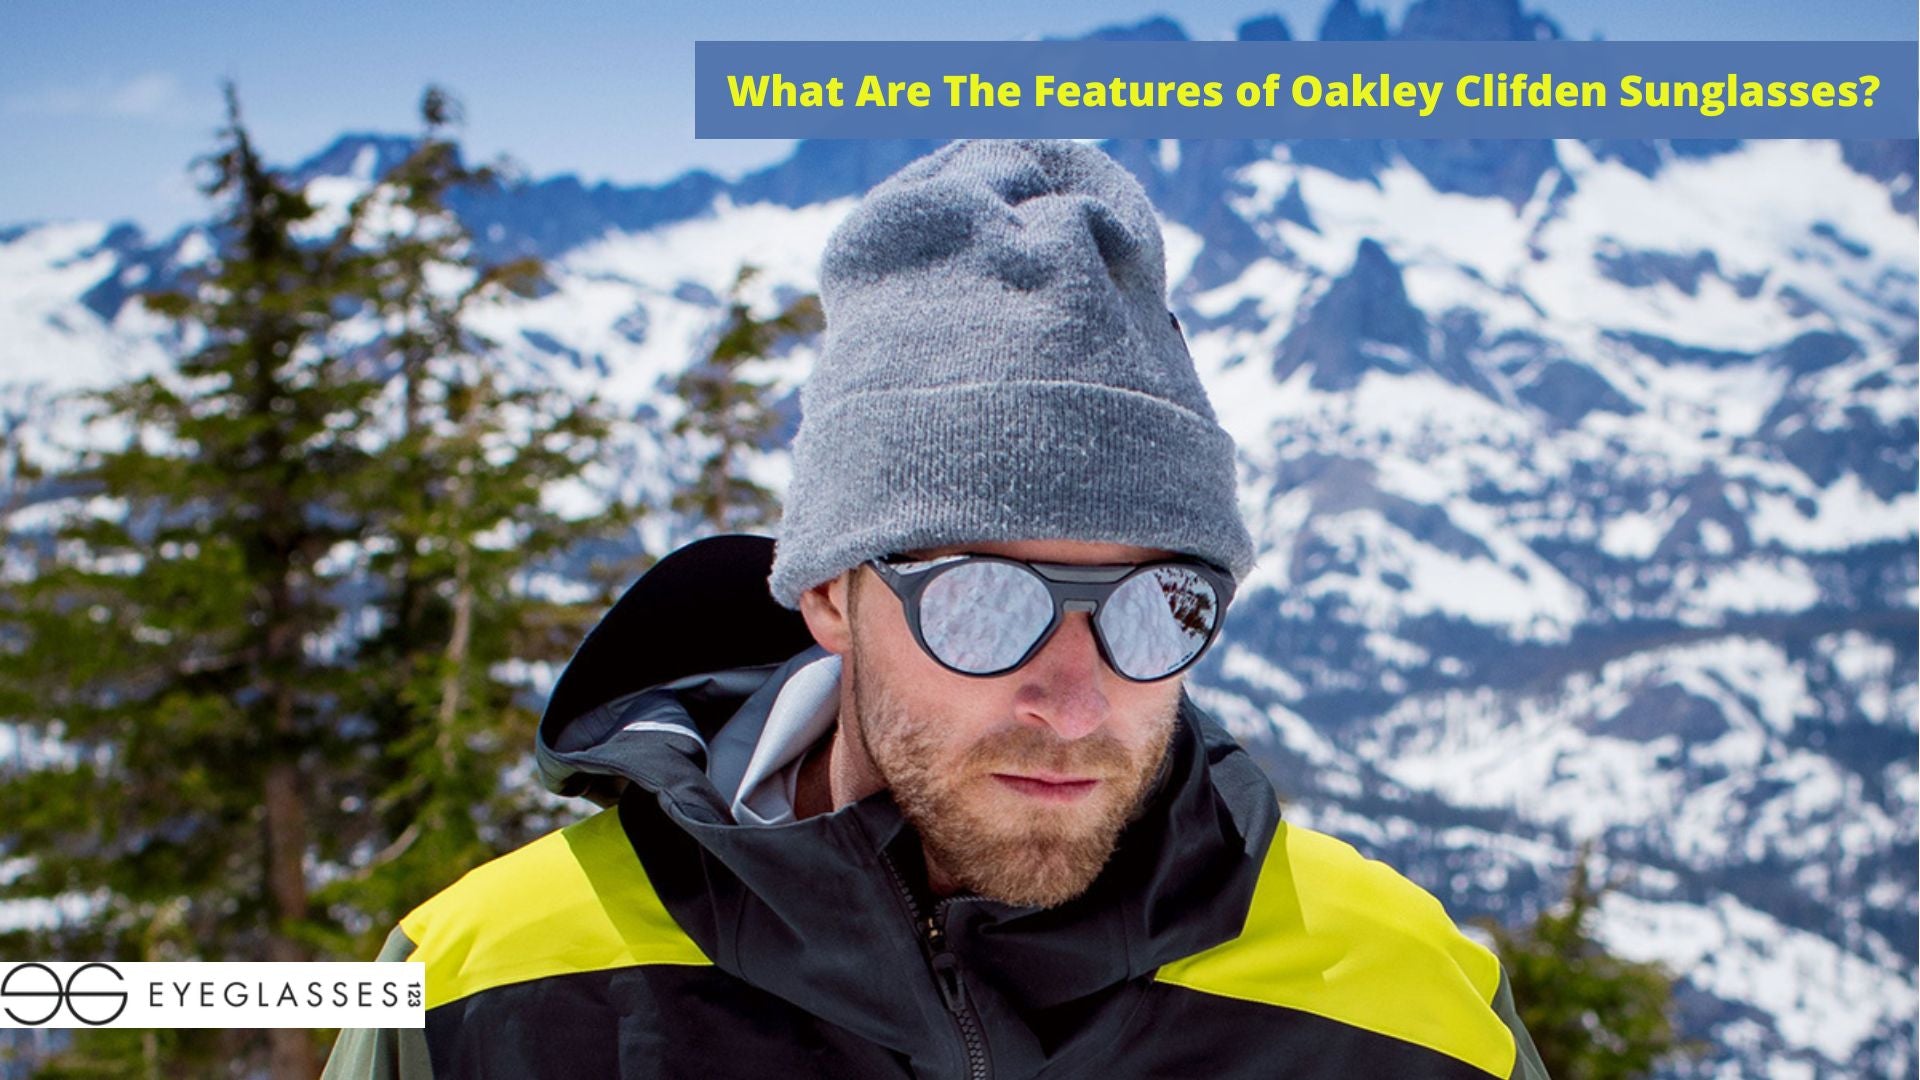 What Are The Features of Oakley Clifden Sunglasses?